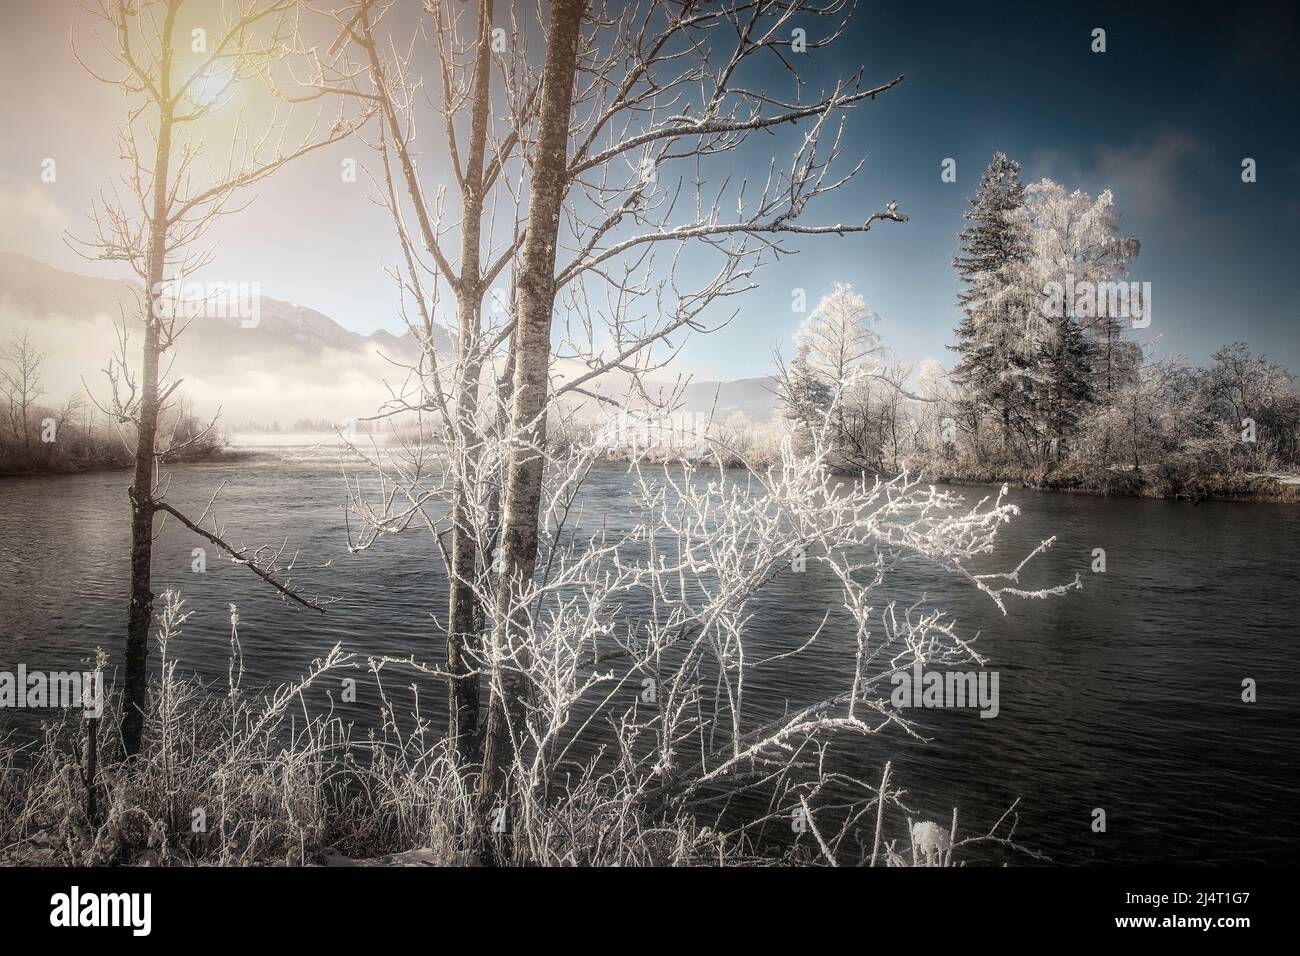 PHOTOGRAPHIC ART: Winter scene at Kochel depicting river Loisach flowing out of Lake Kochelsee, Oberbayern, Germany Stock Photo